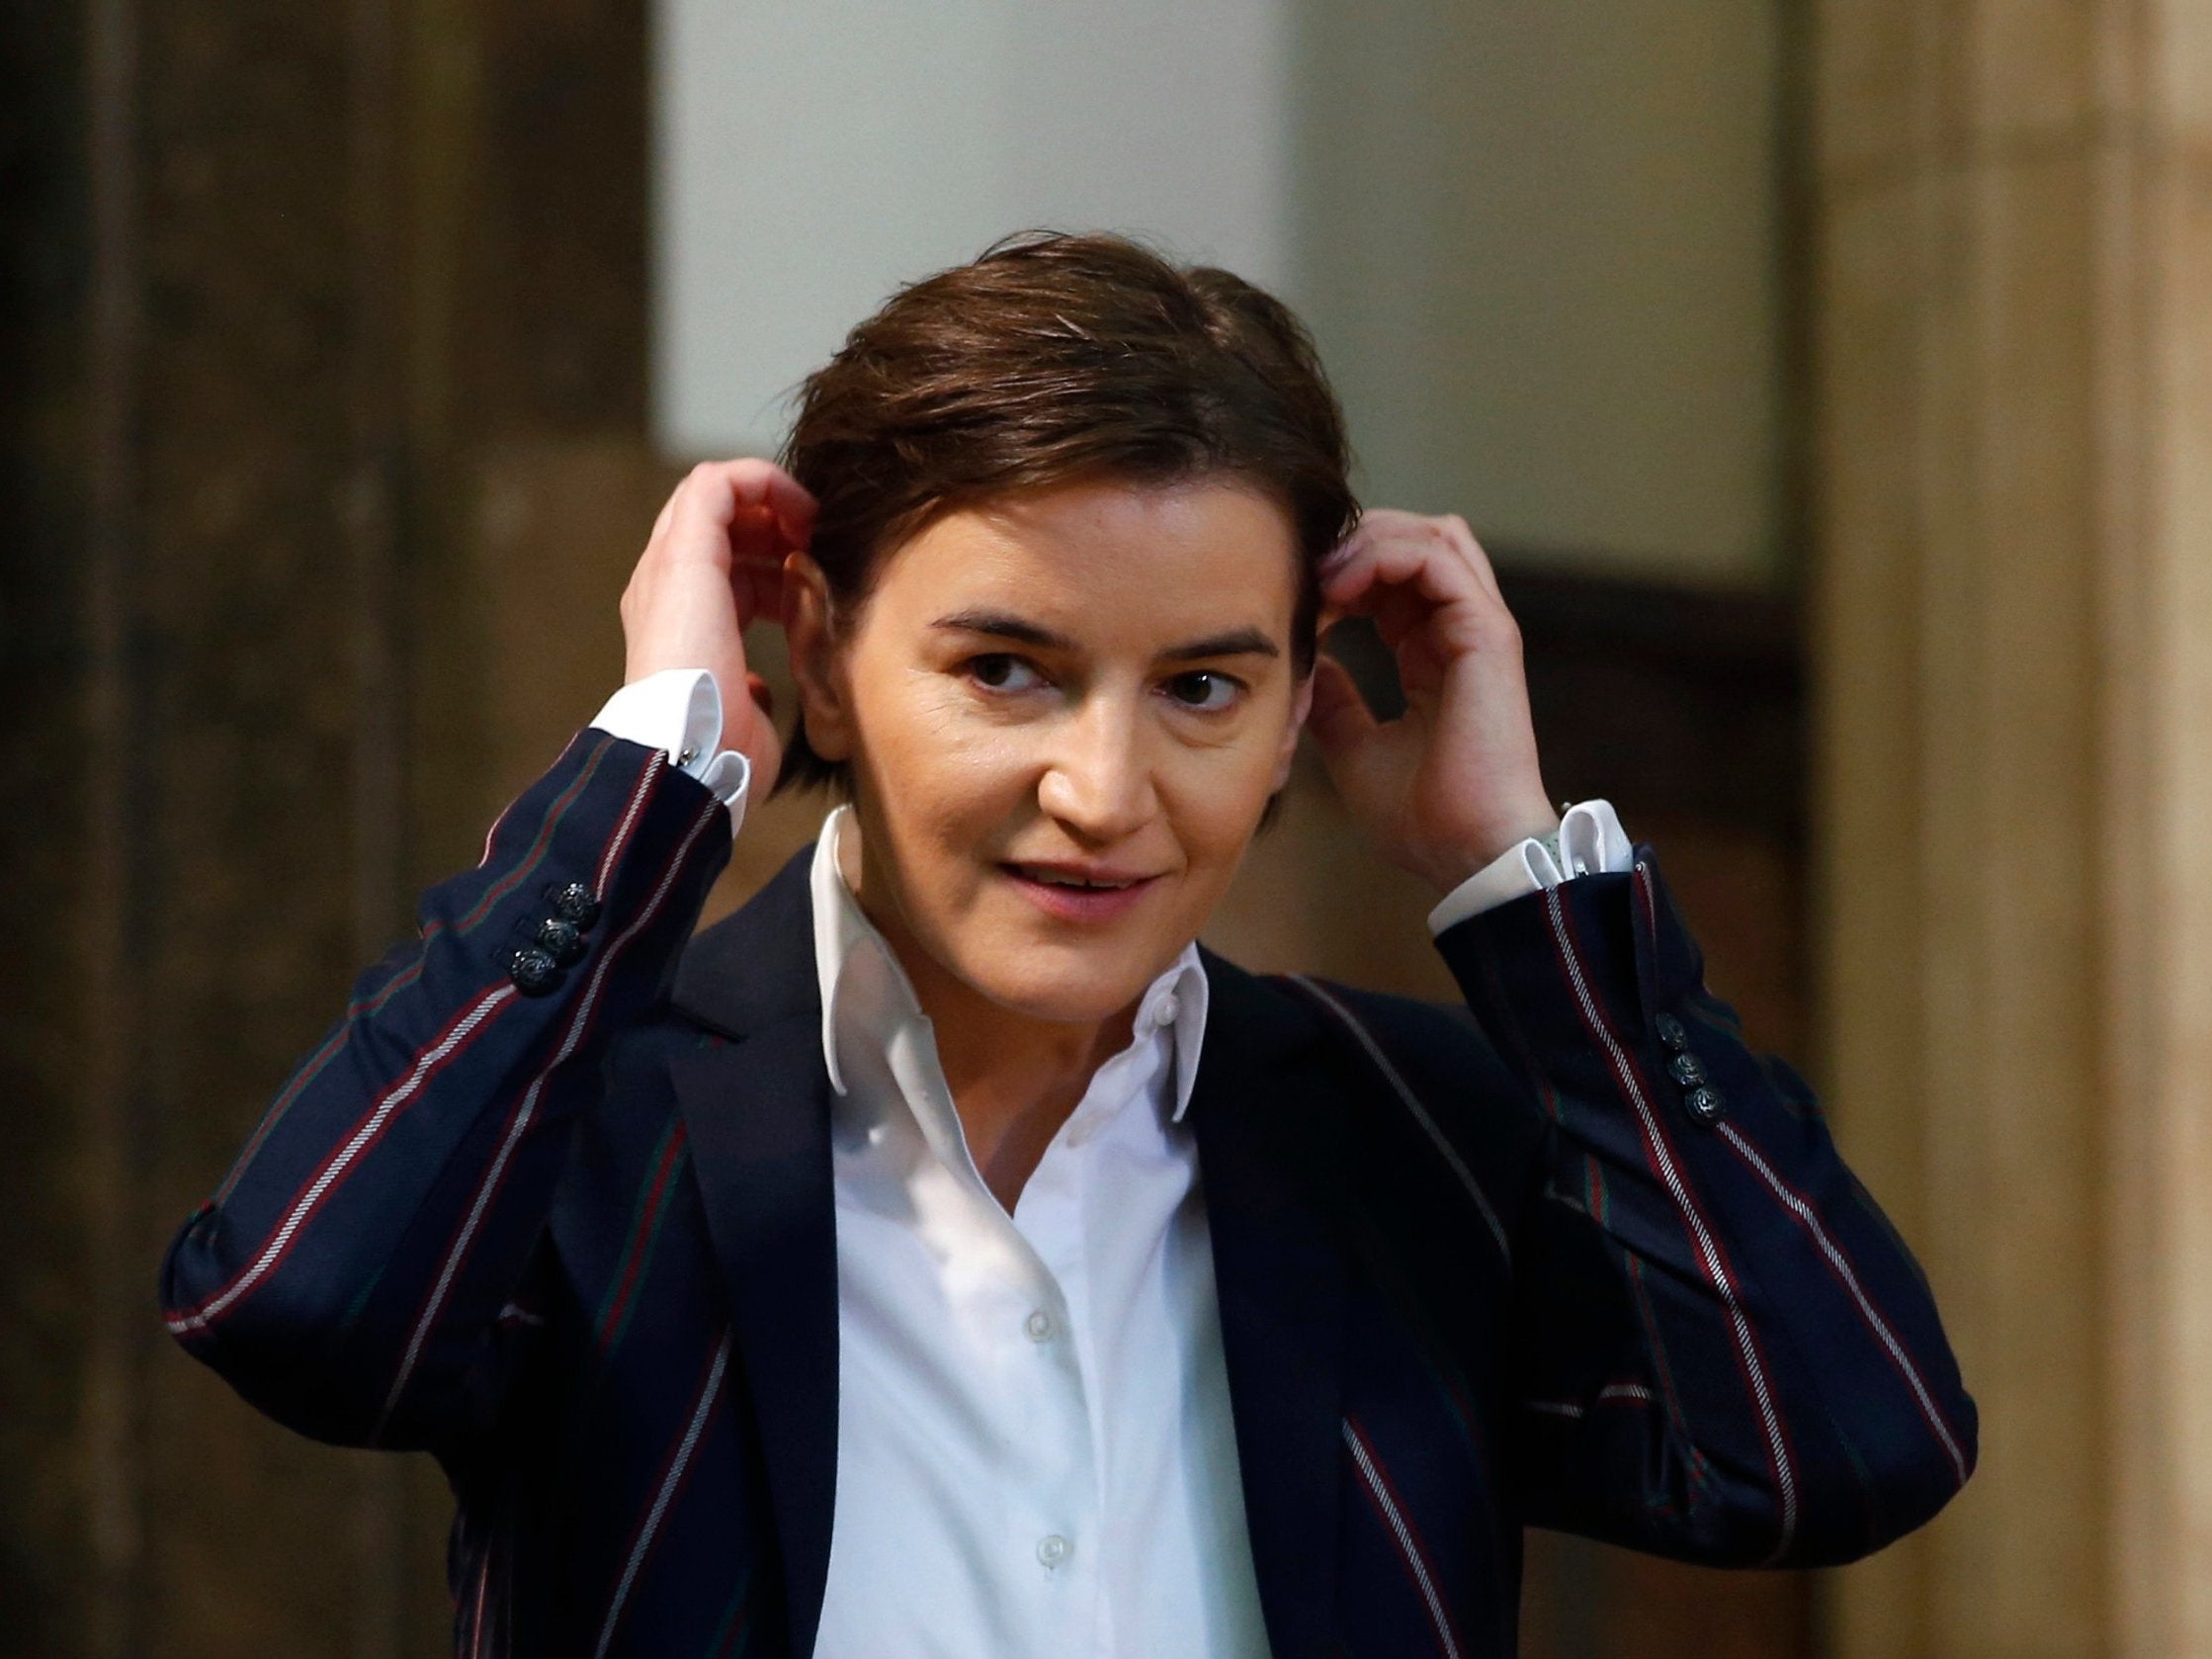 Serbia's openly gay prime minister Ana Brnabic at the parliament building in Belgrade